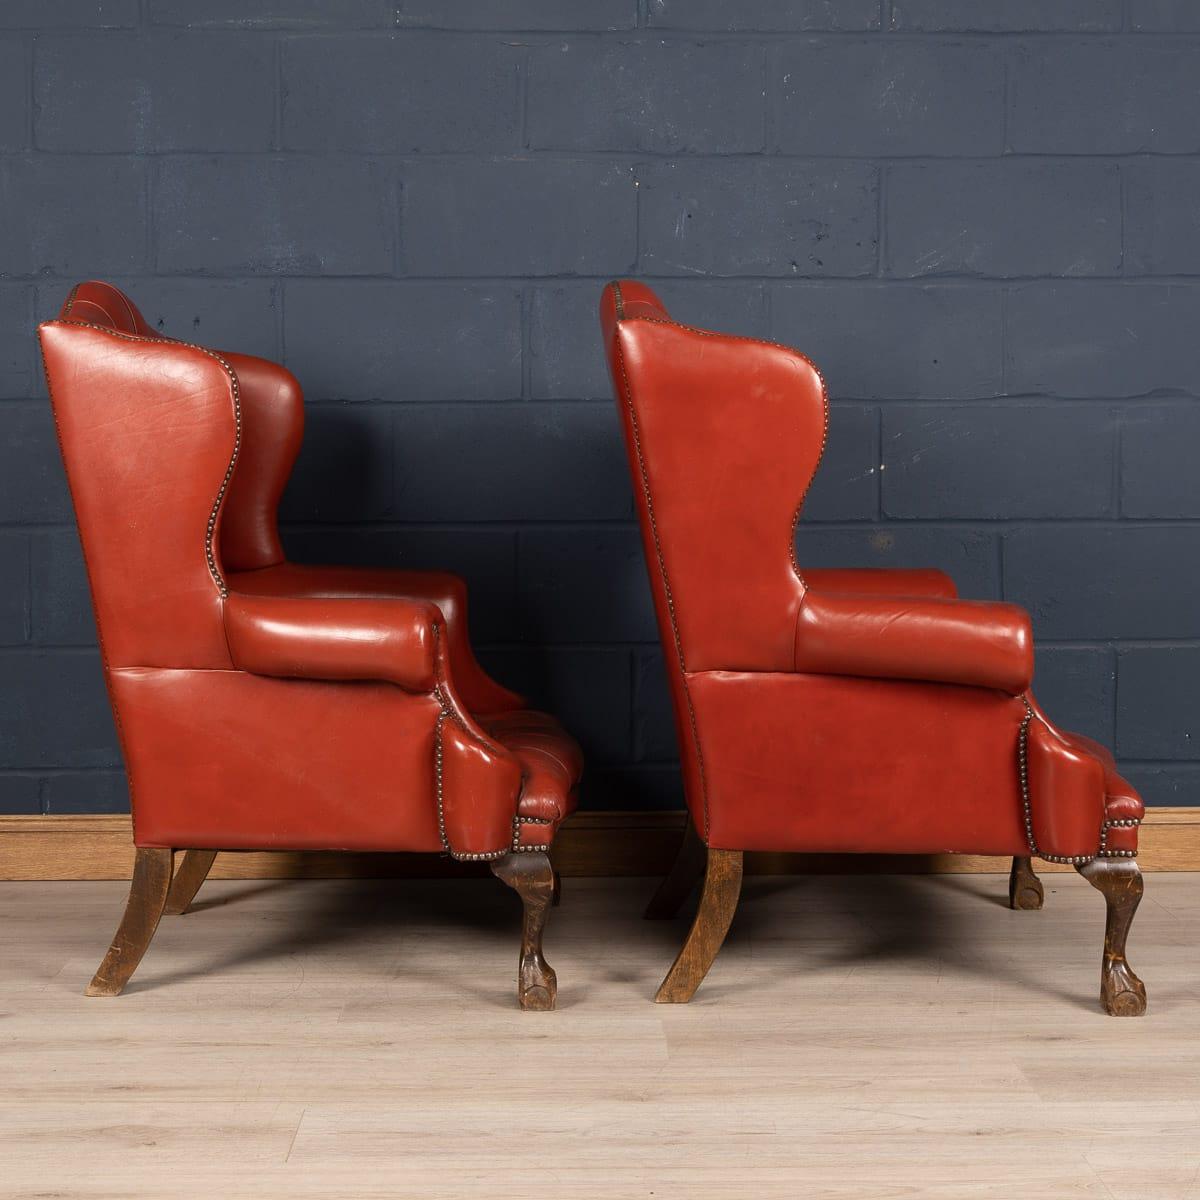 20th Century Pair of English Leather Wingback Armchairs, circa 1970 For Sale 2